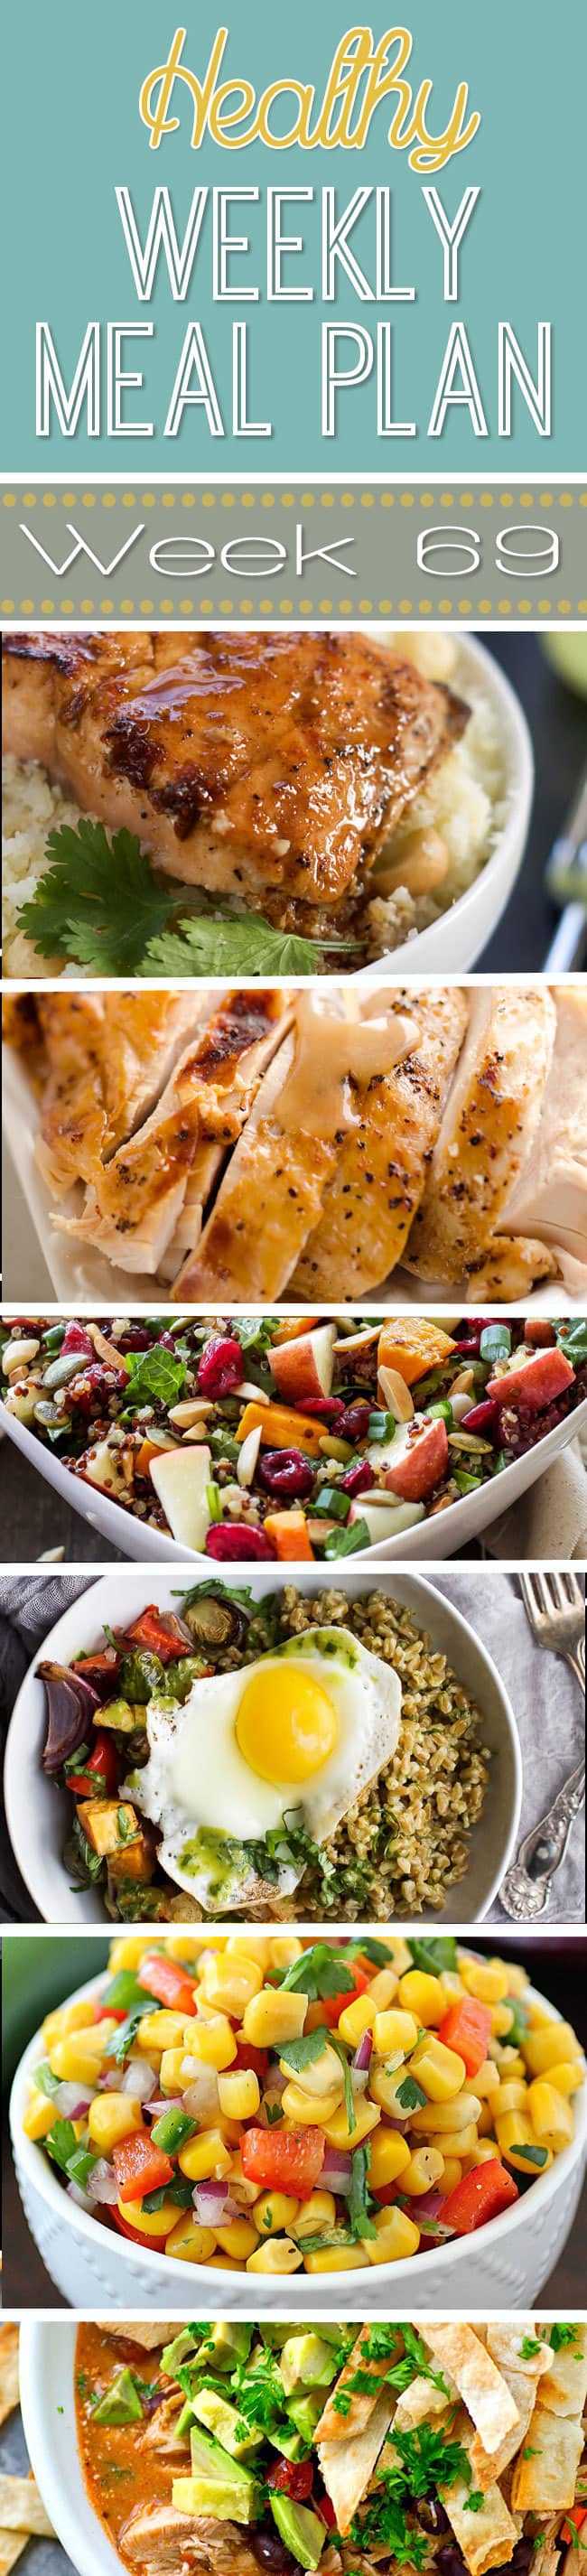 Plan out your weekly menu with this Healthy Weekly Meal Plan #69! So many delicious and healthy dinner recipes along with a healthy breakfast, lunch, side dish and dessert recipe! You have to see this week's recipes!